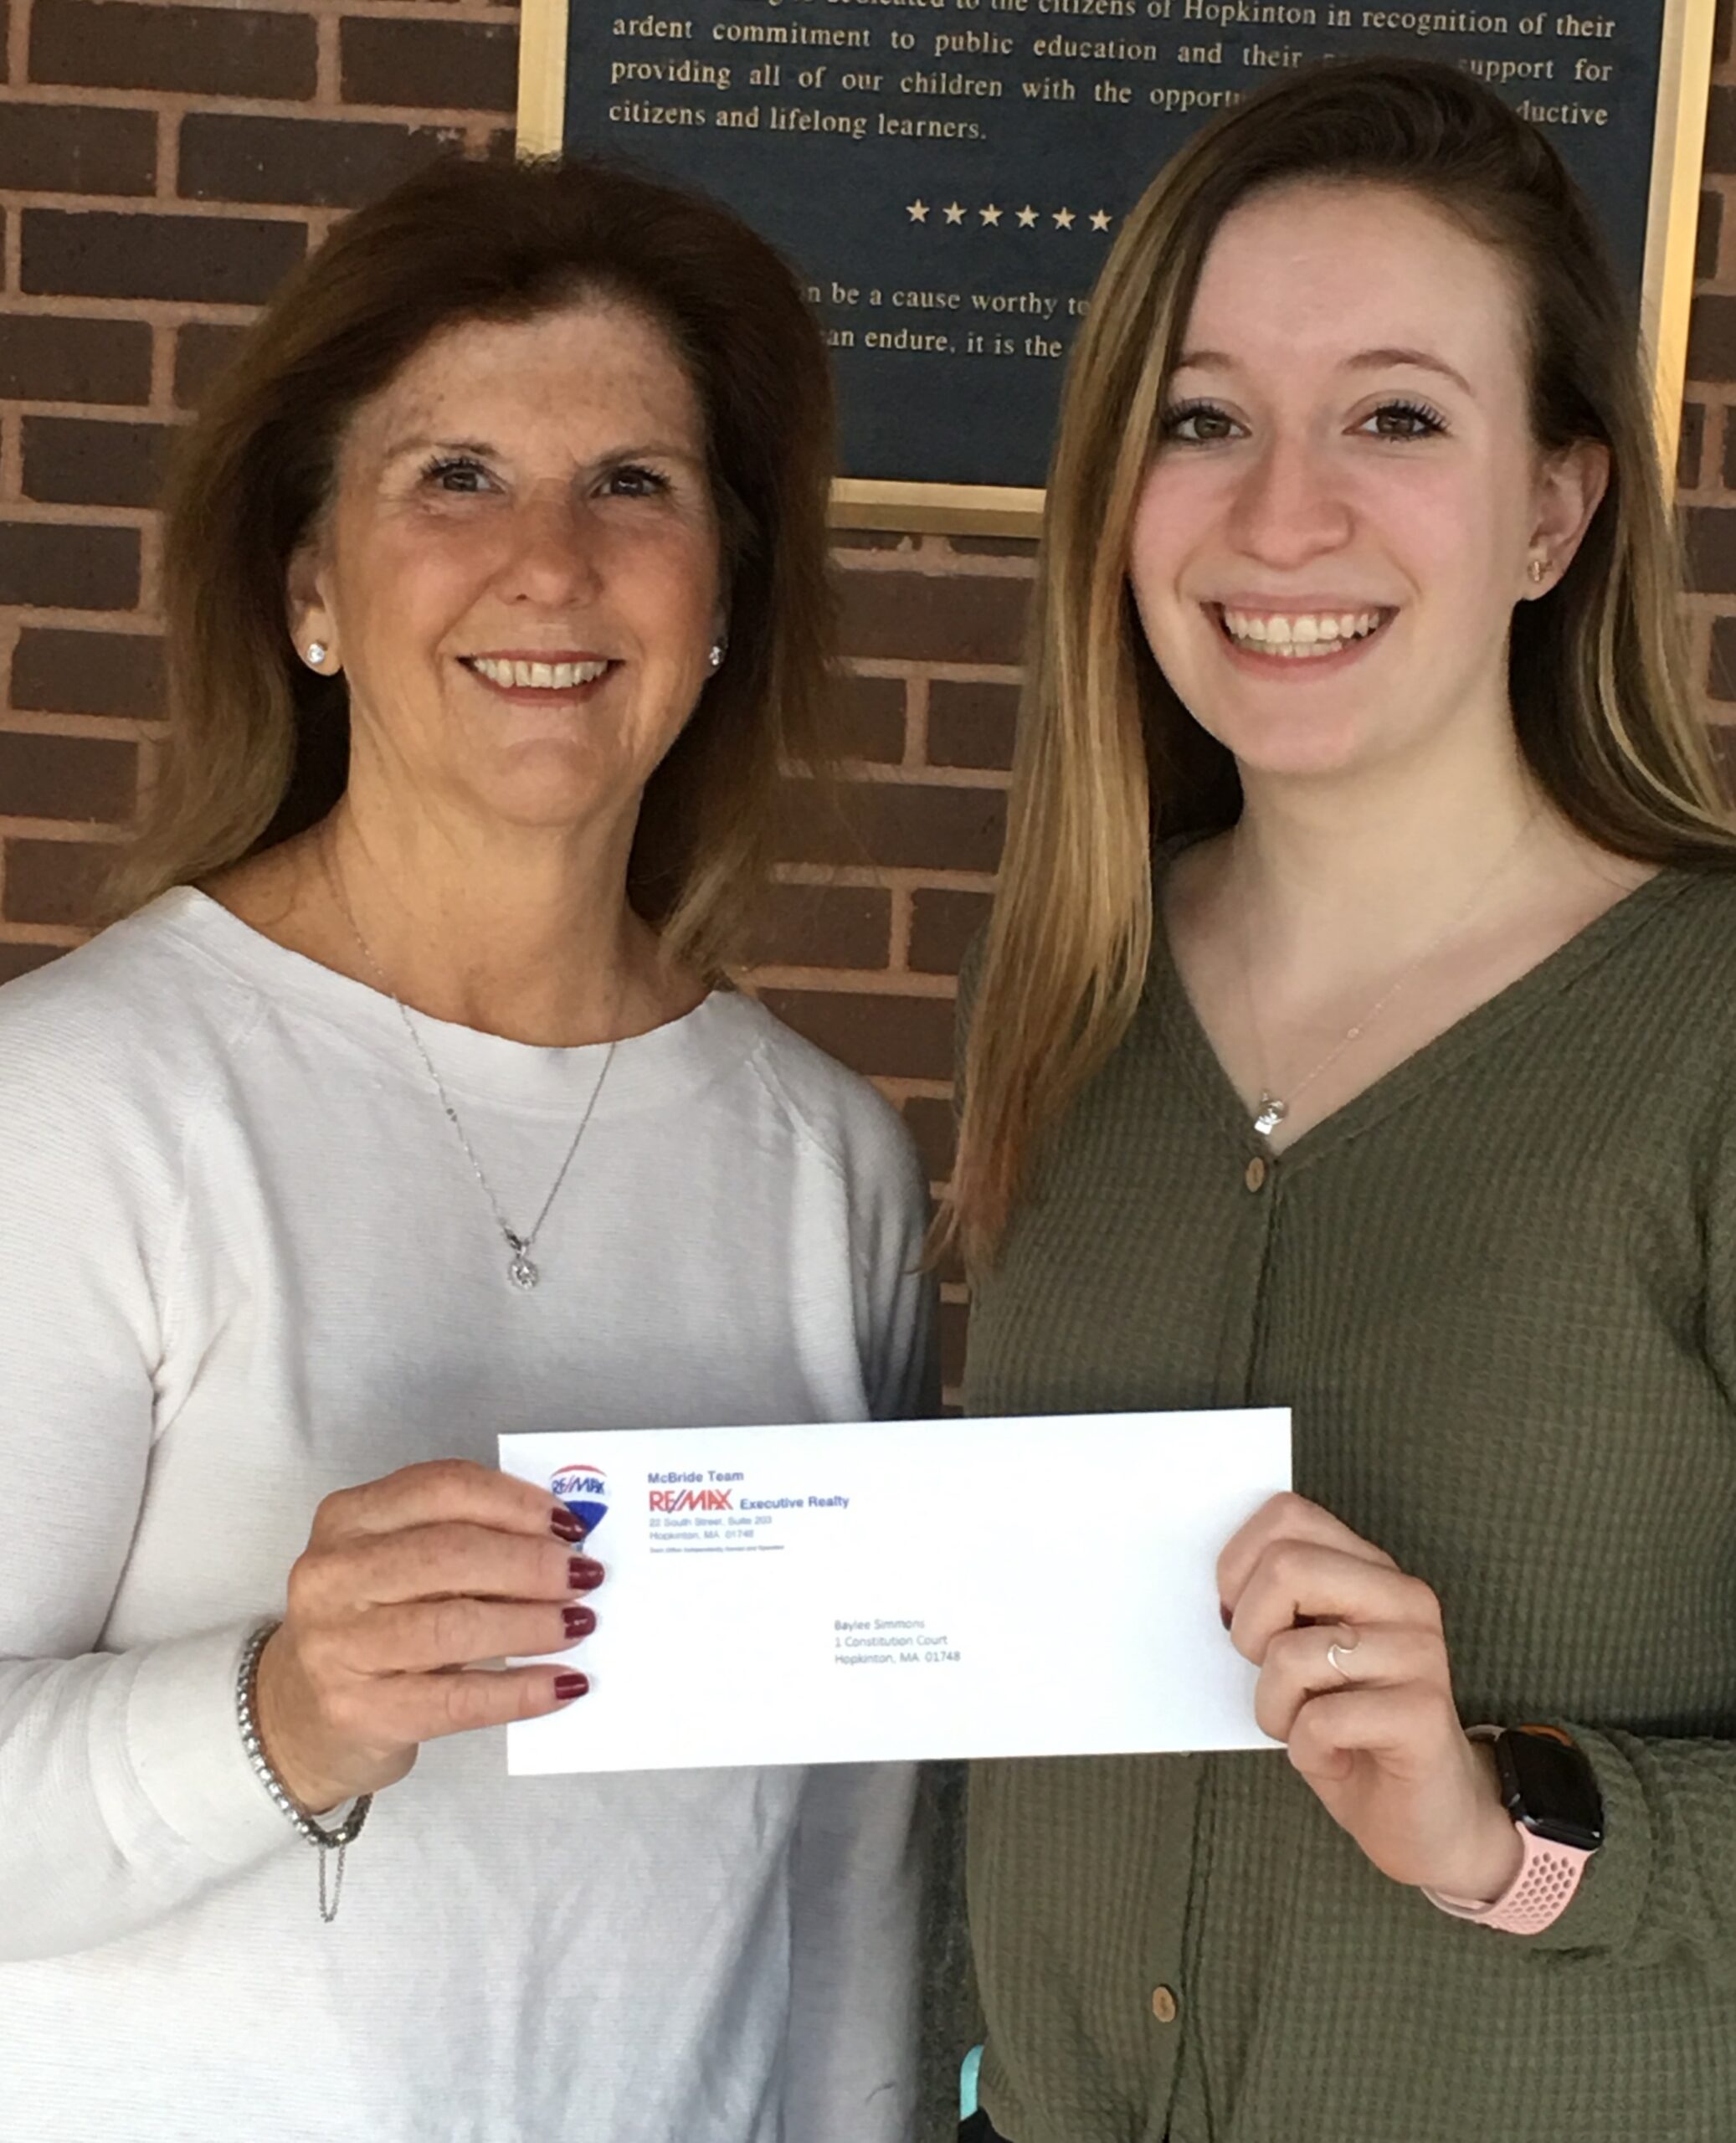 Baylee Simmons named RE/MAX Executive Realty’s Student of the Month